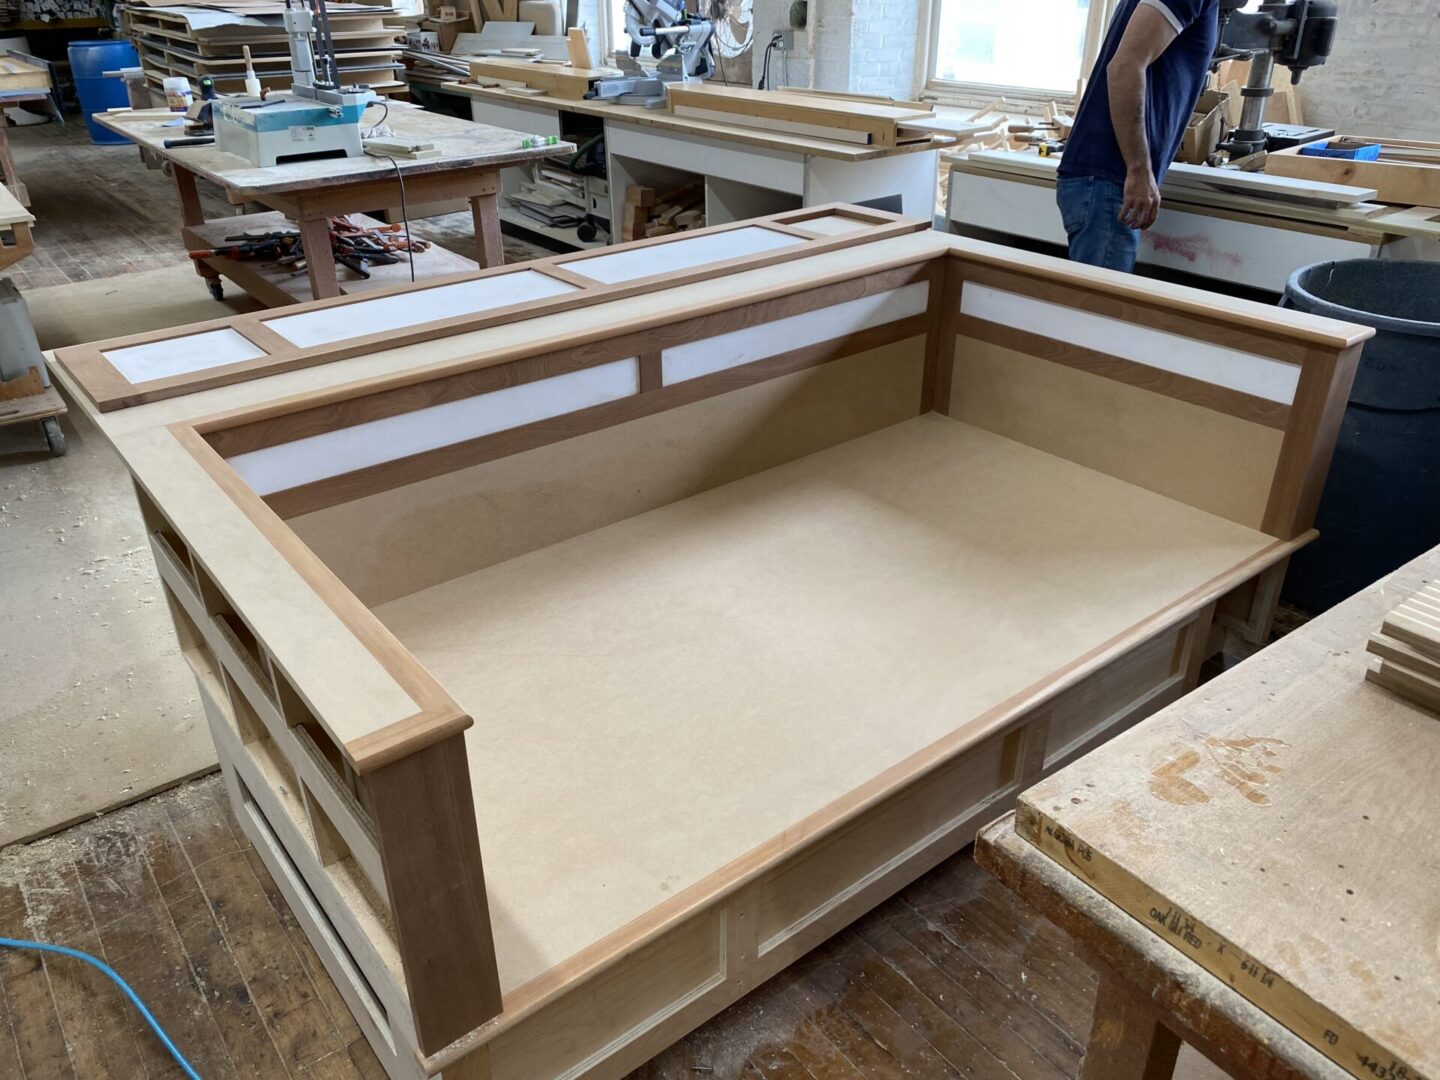 Close view of the wooden beds in progress